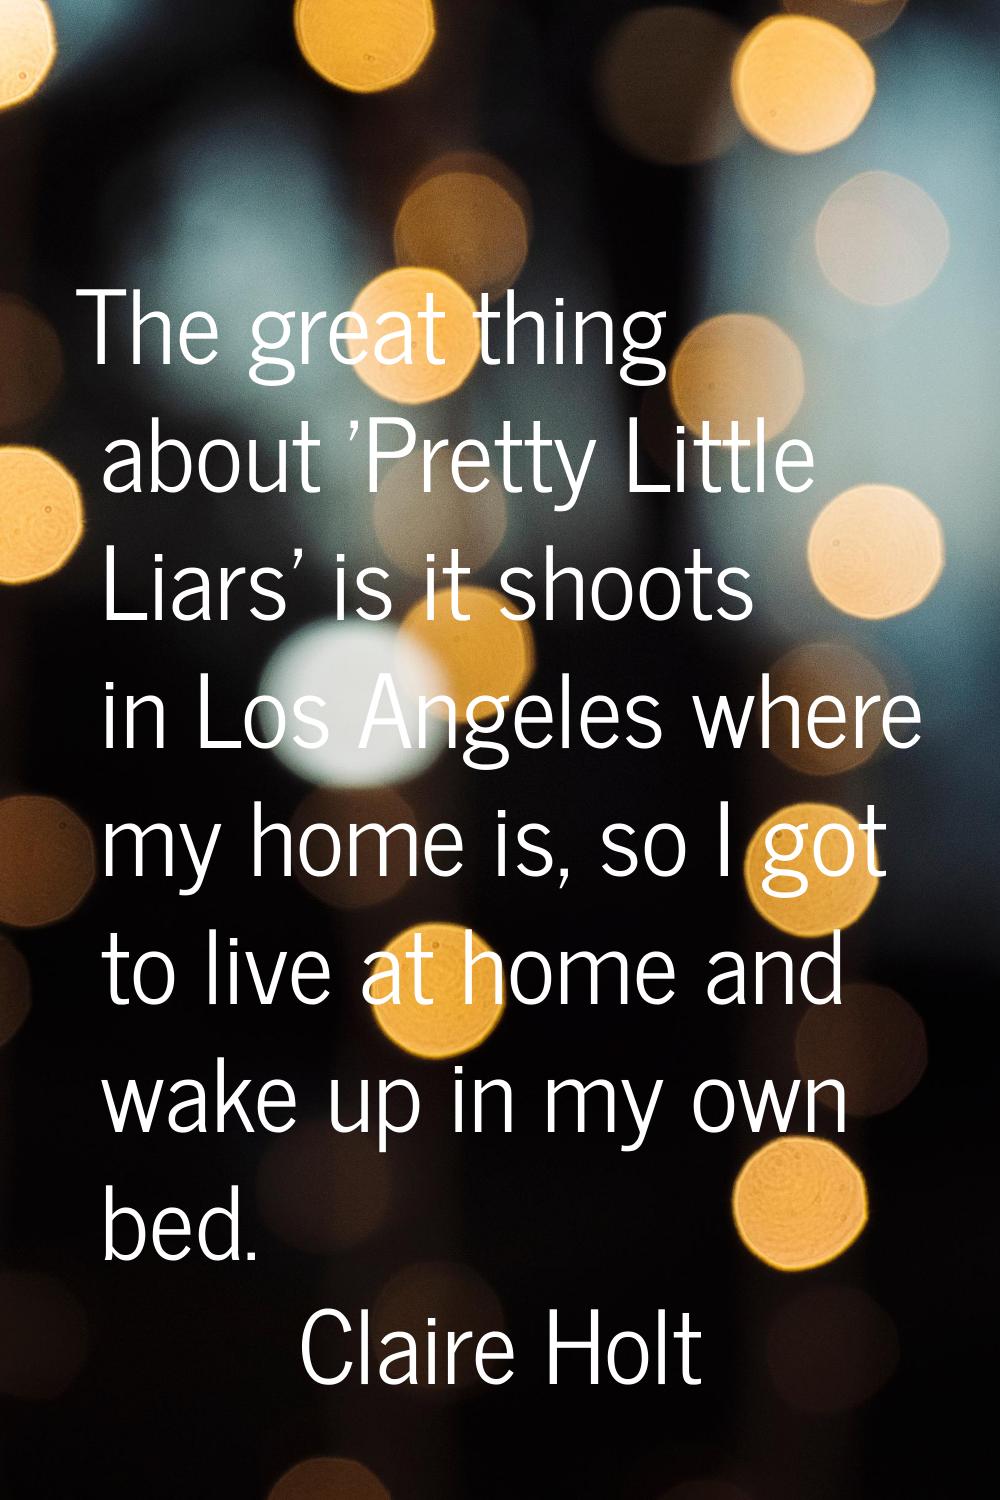 The great thing about 'Pretty Little Liars' is it shoots in Los Angeles where my home is, so I got 